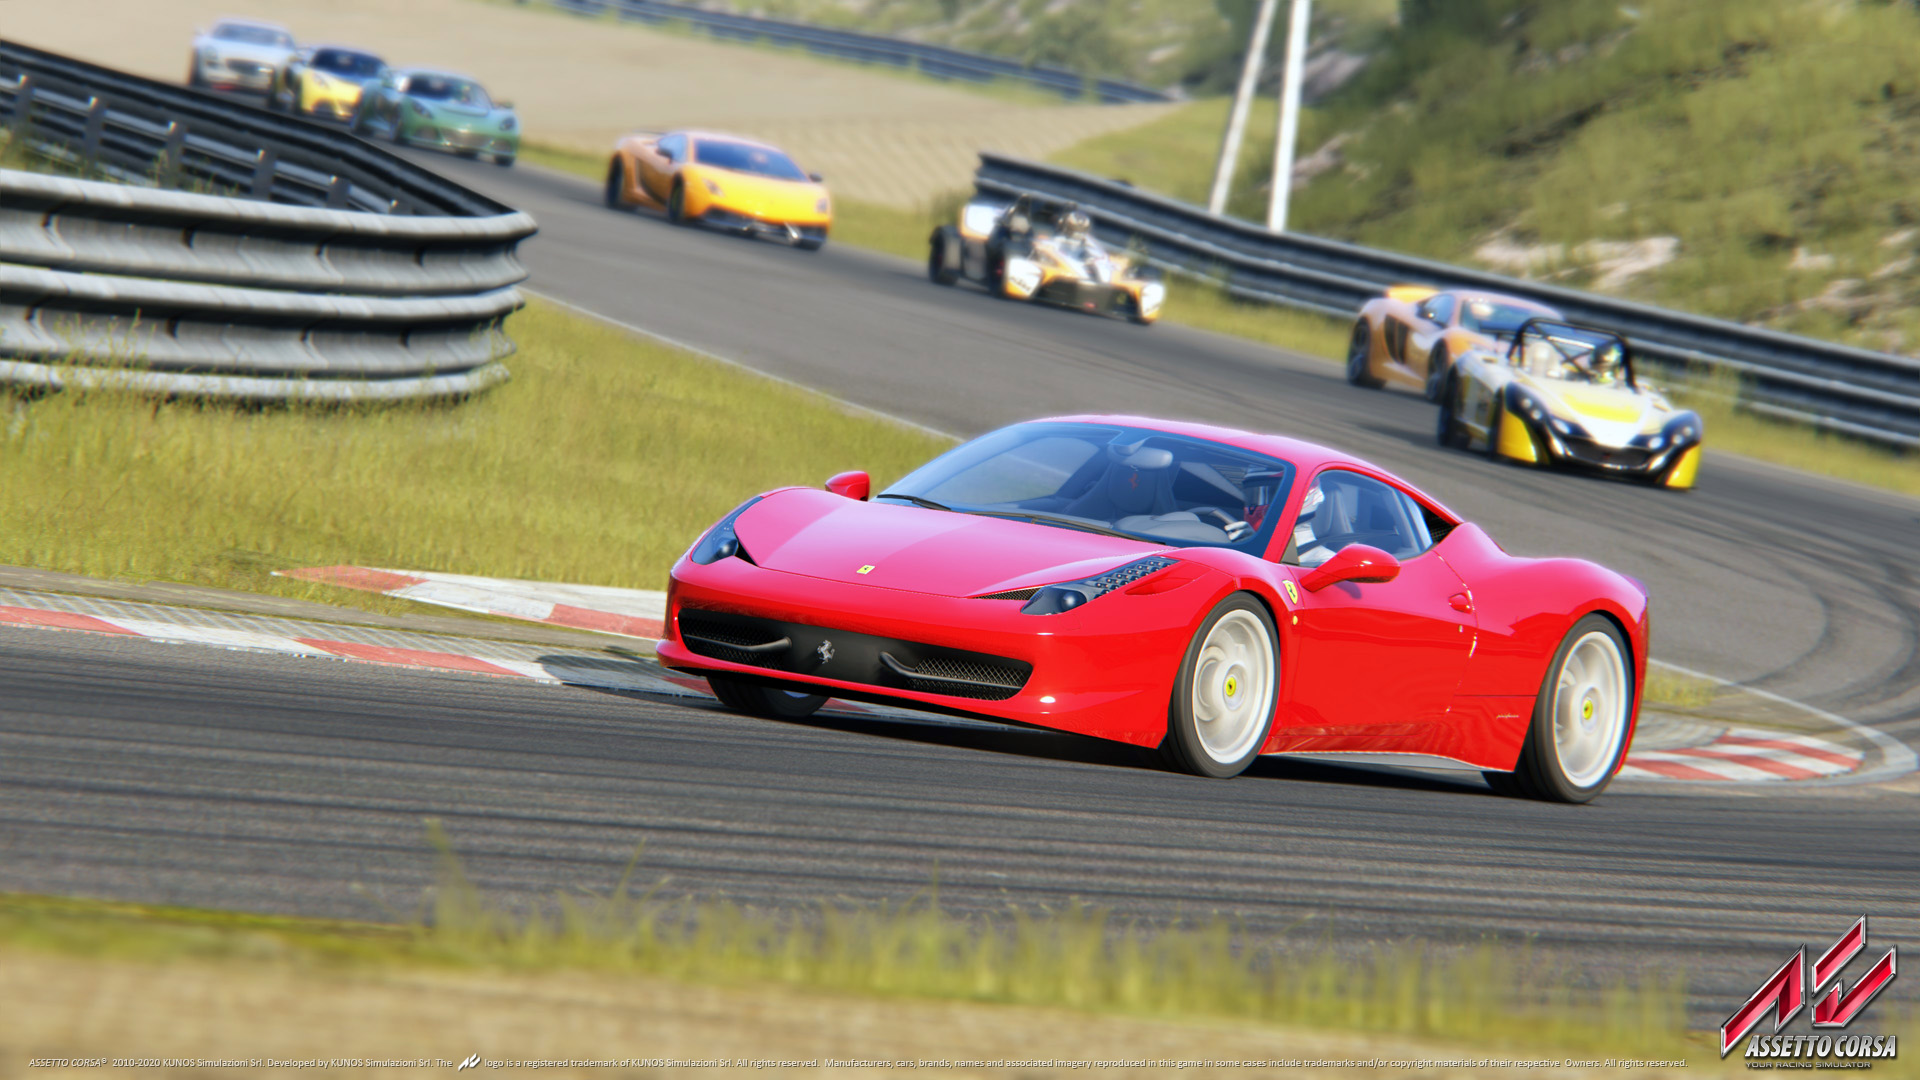 HQ Assetto Corsa Wallpapers | File 456.03Kb